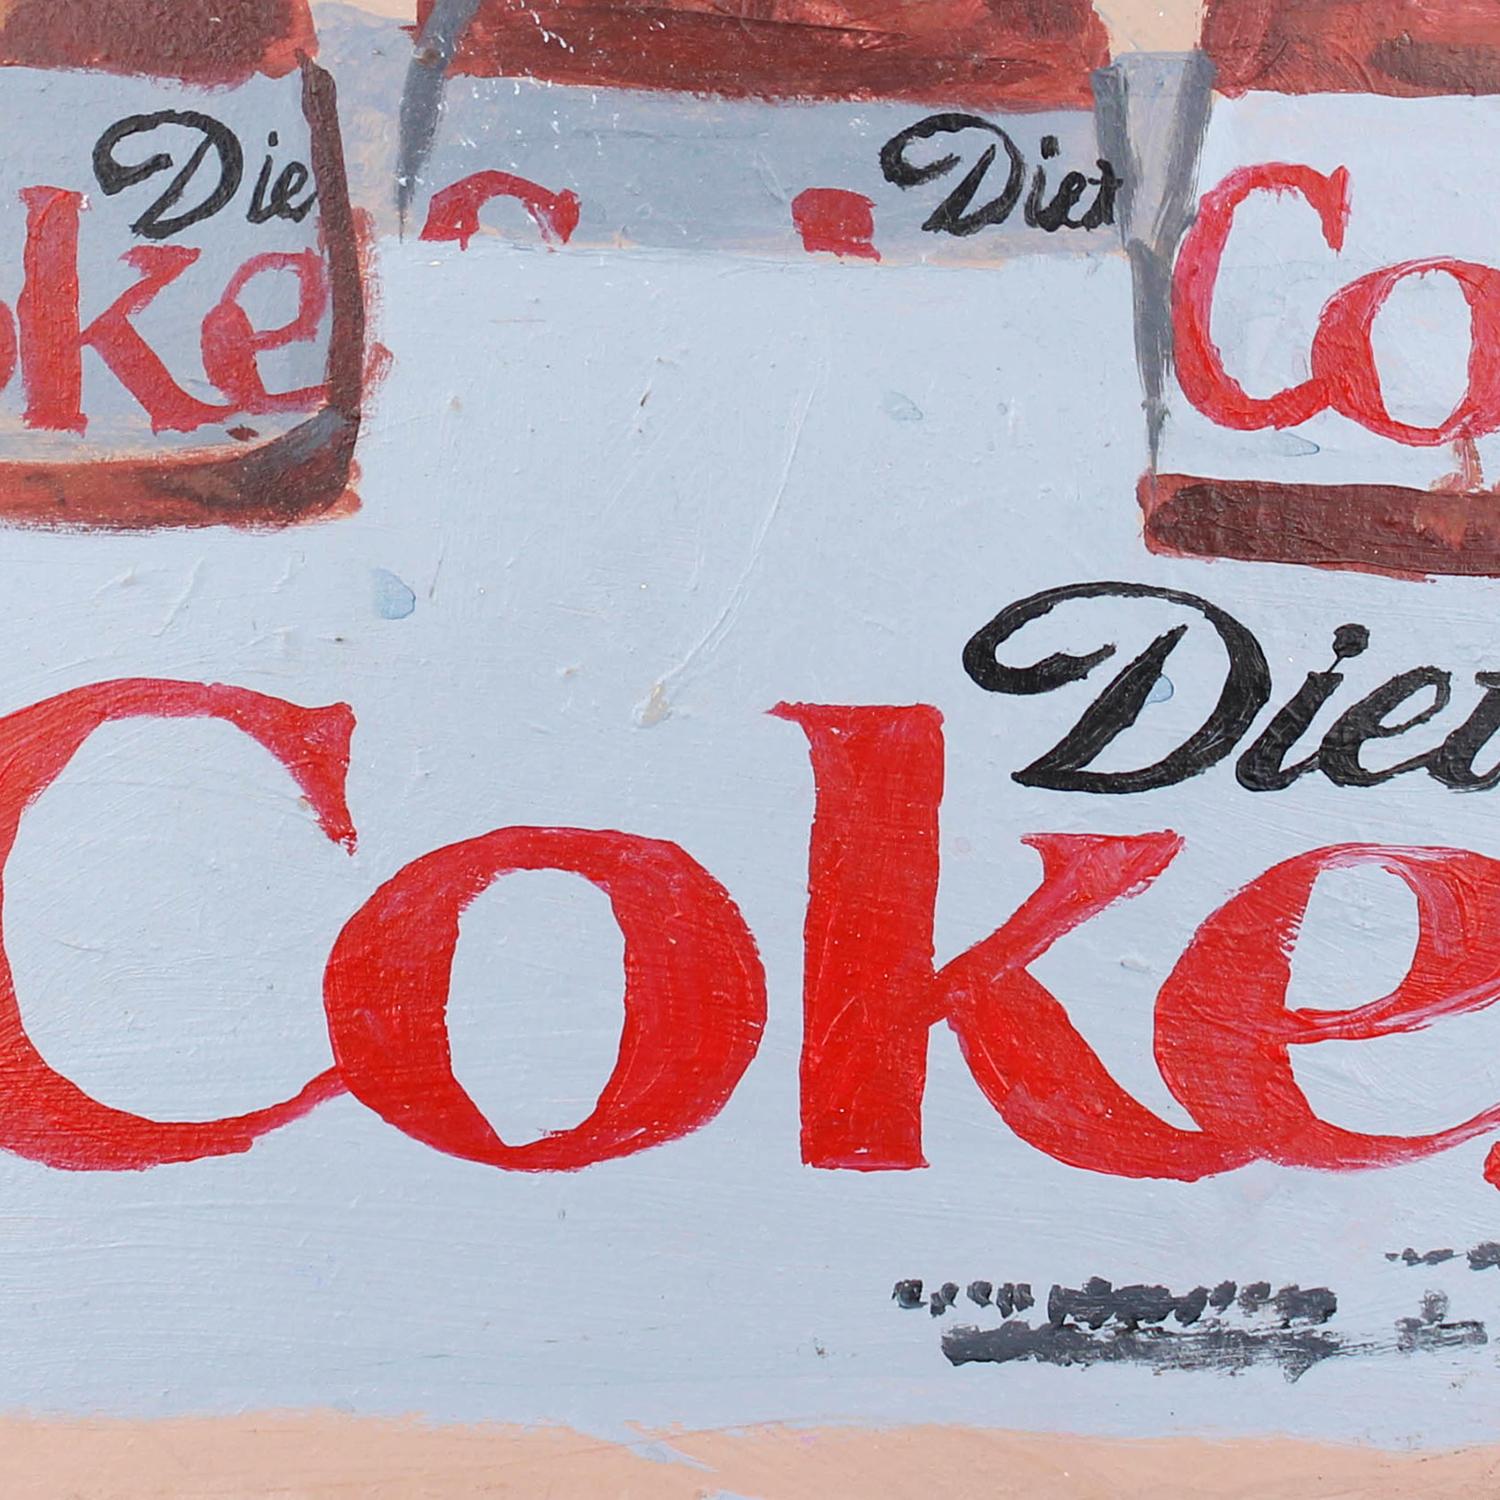 Diet Coke - Painting by Brendan O'Connell